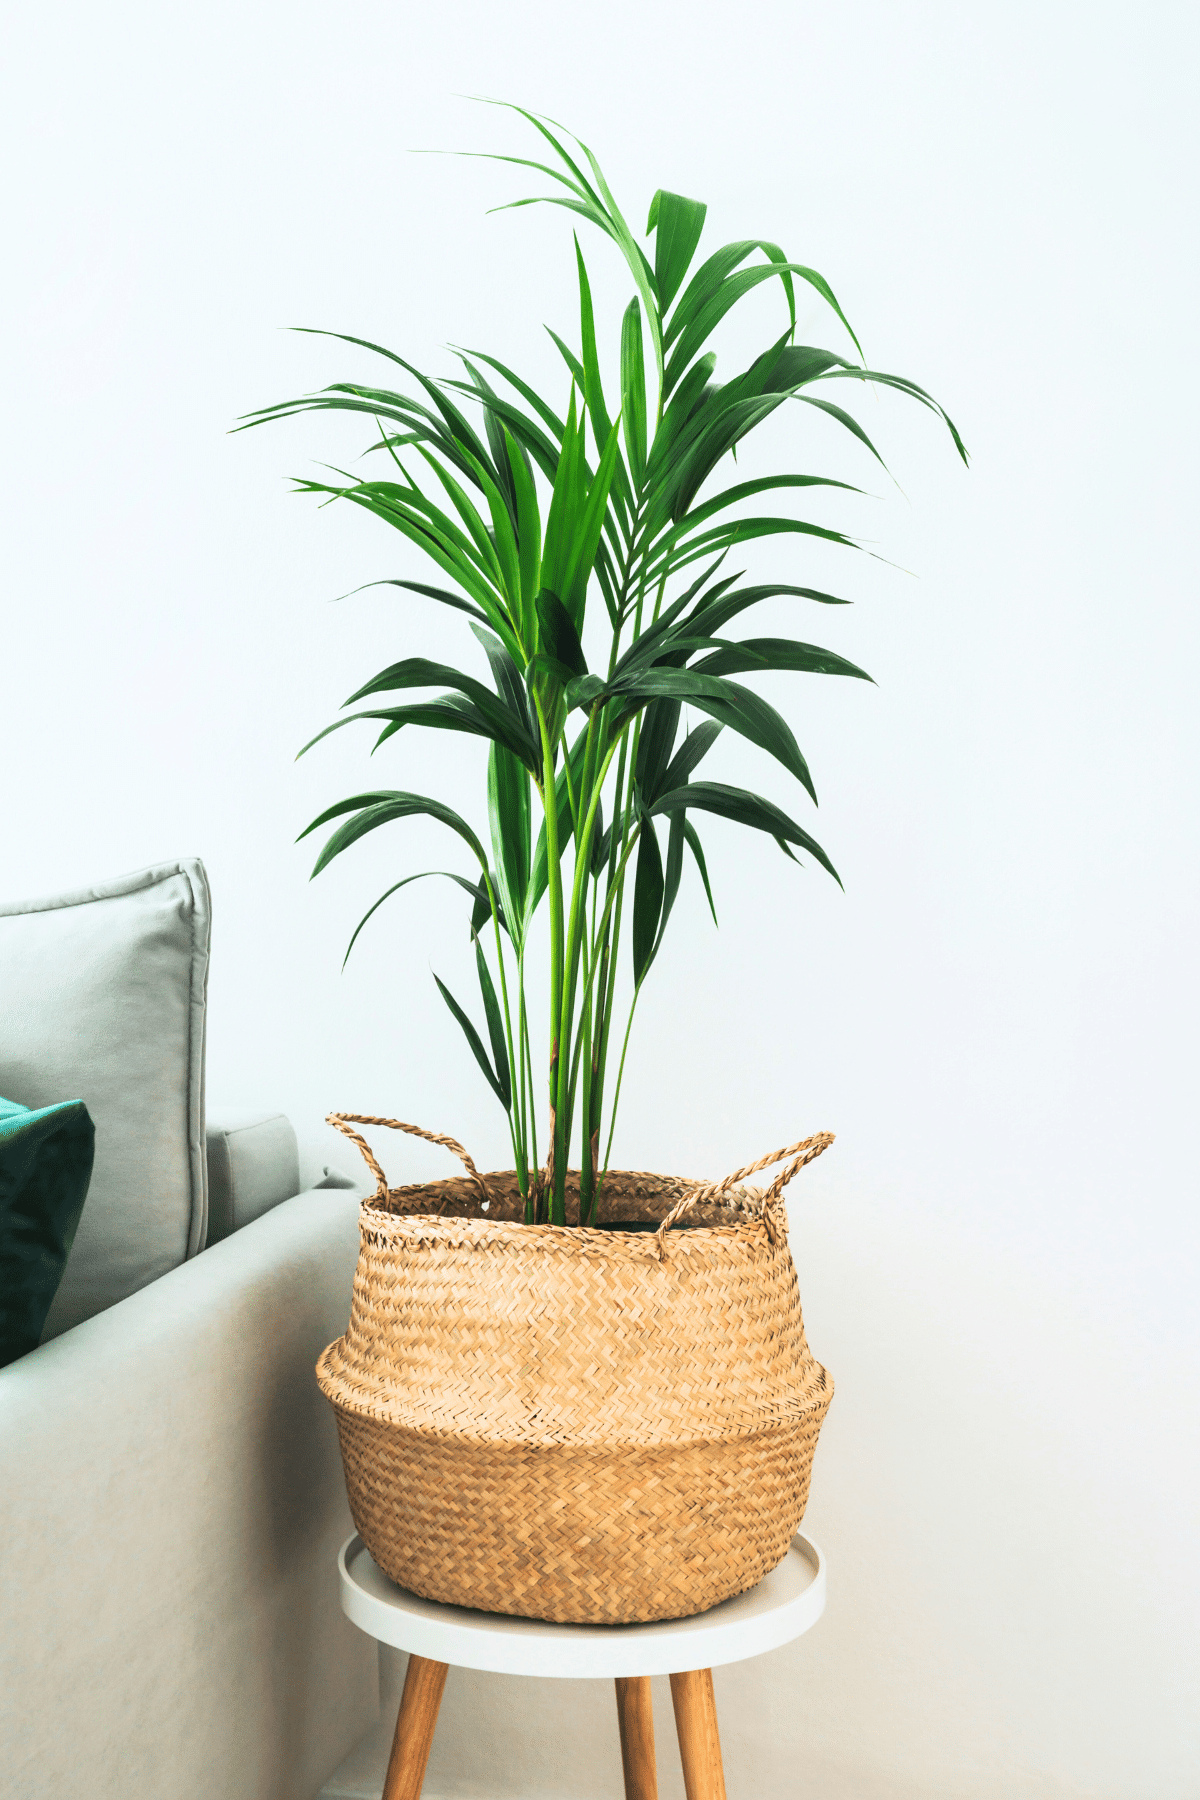 Kentia Palm (Howea Forsteriana) plant in a wicker basket on a table in a living room.